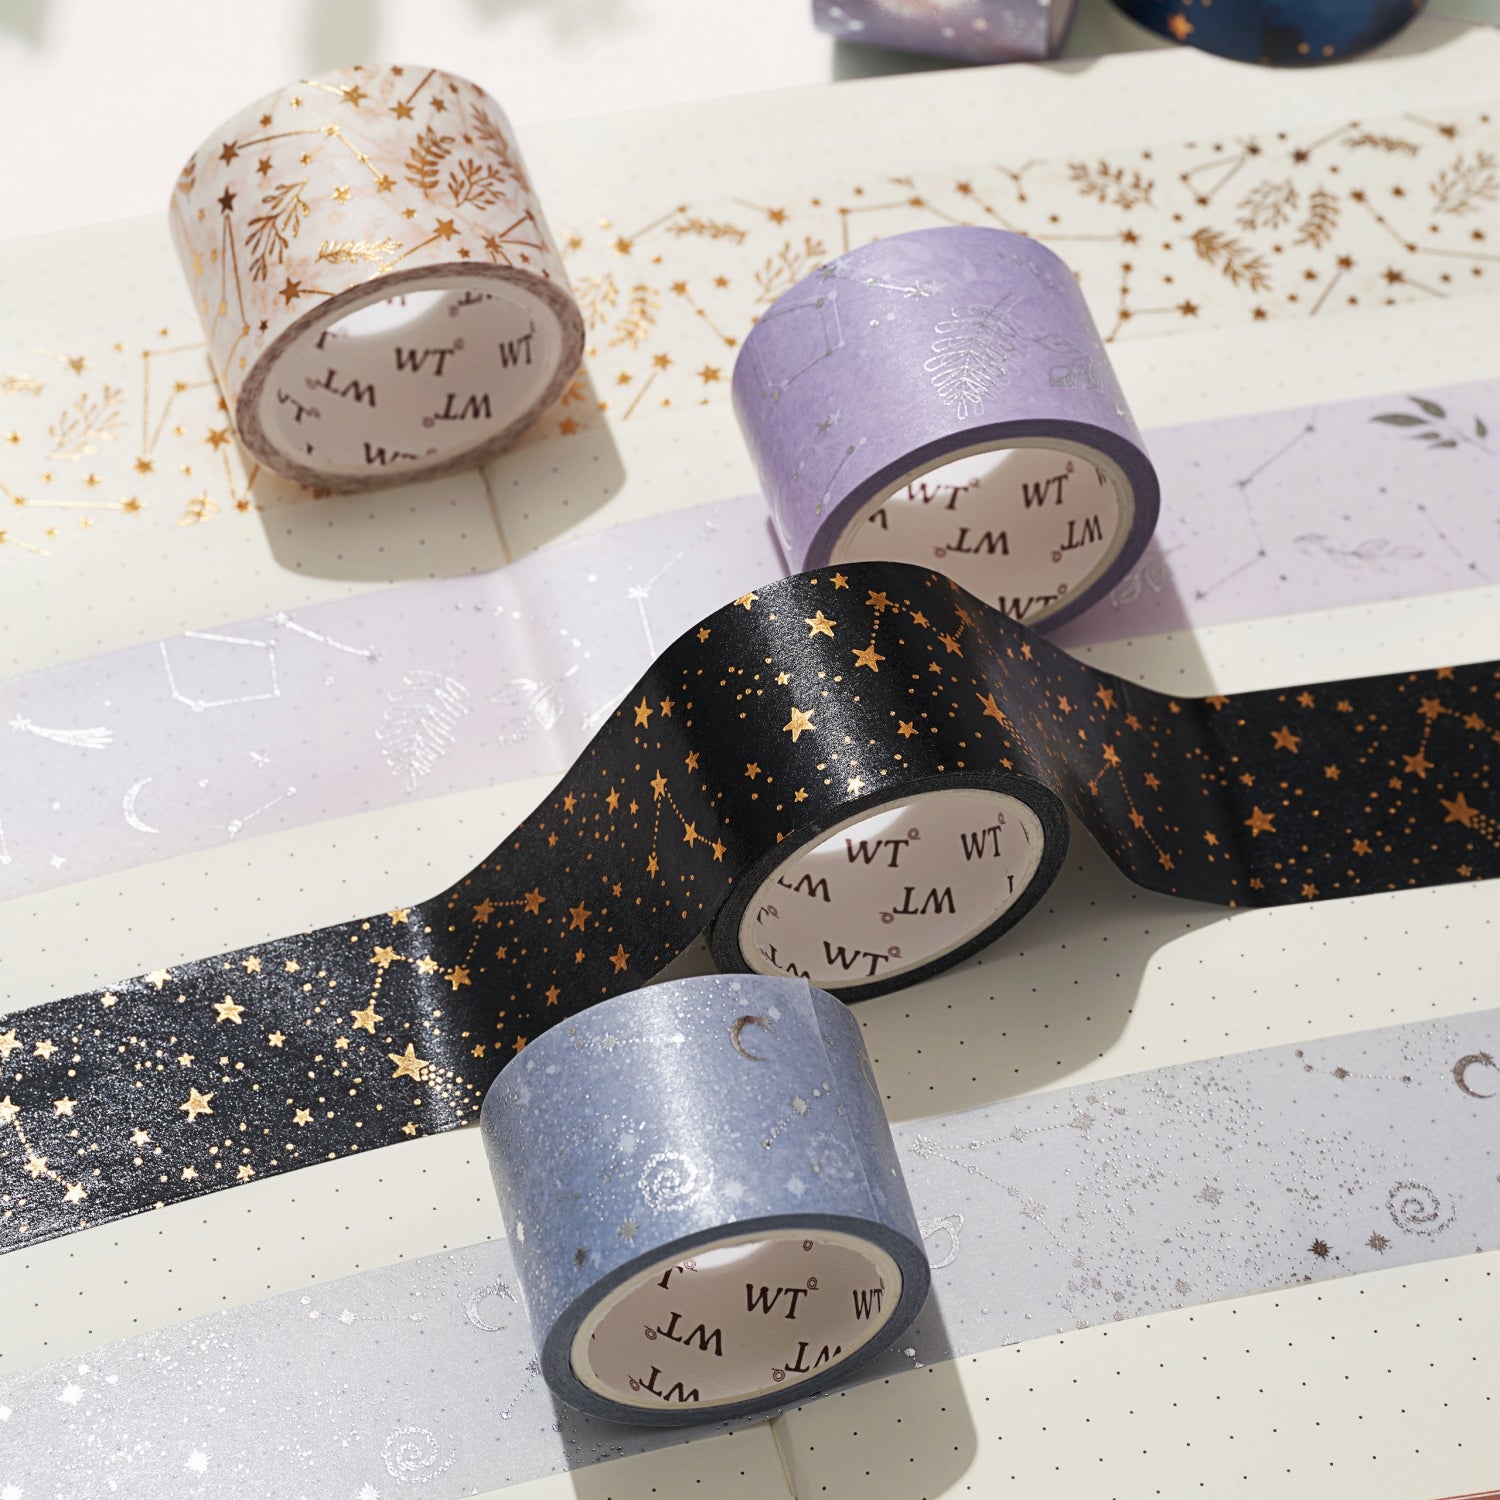 Starry Sky Washi Tape Set | The Washi Tape Shop. Beautiful Washi and Decorative Tape For Bullet Journals, Gift Wrapping, Planner Decoration and DIY Projects